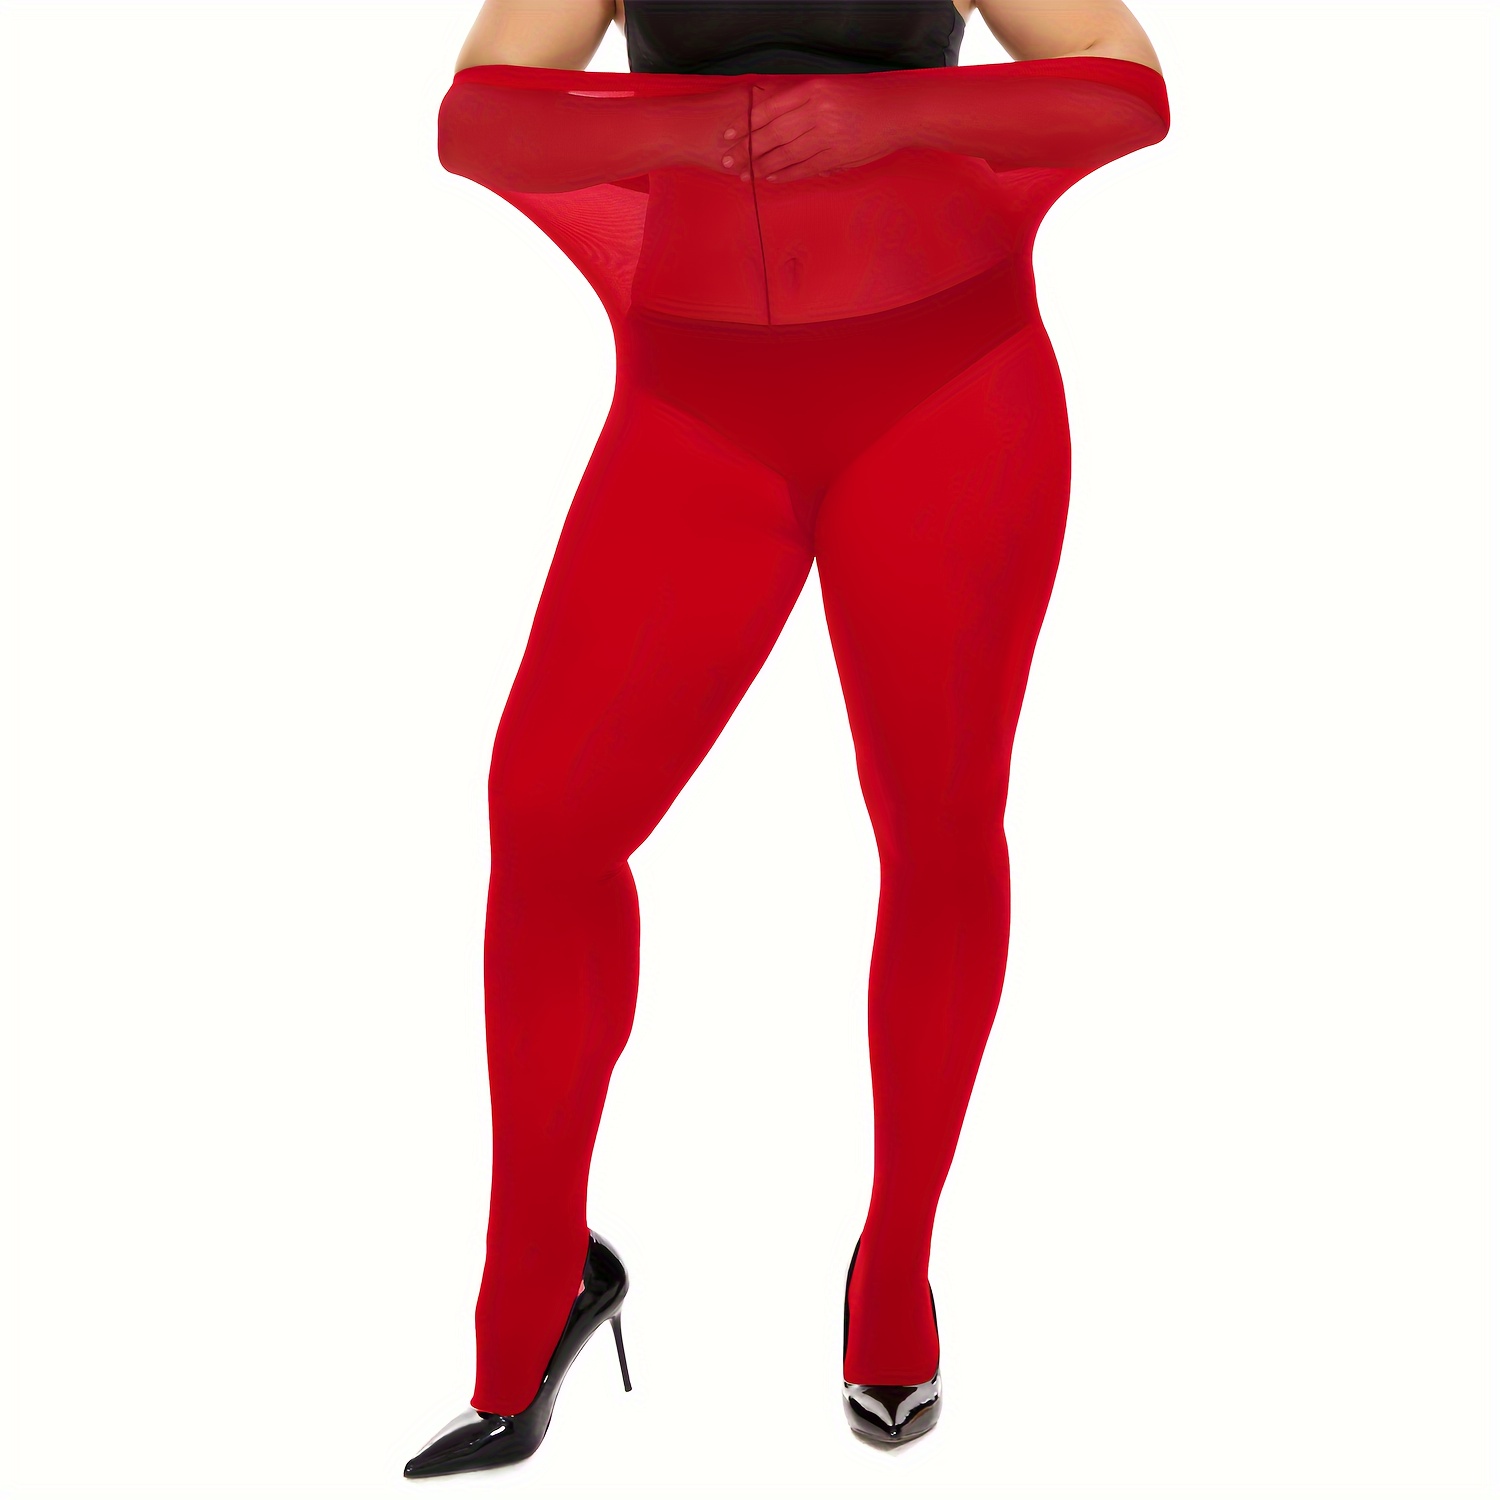  Citystl Opaque Red Tights For Women, 80D Tummy Compression  Plus Size Tights, Control Top Microfiber Pantyhose For Women